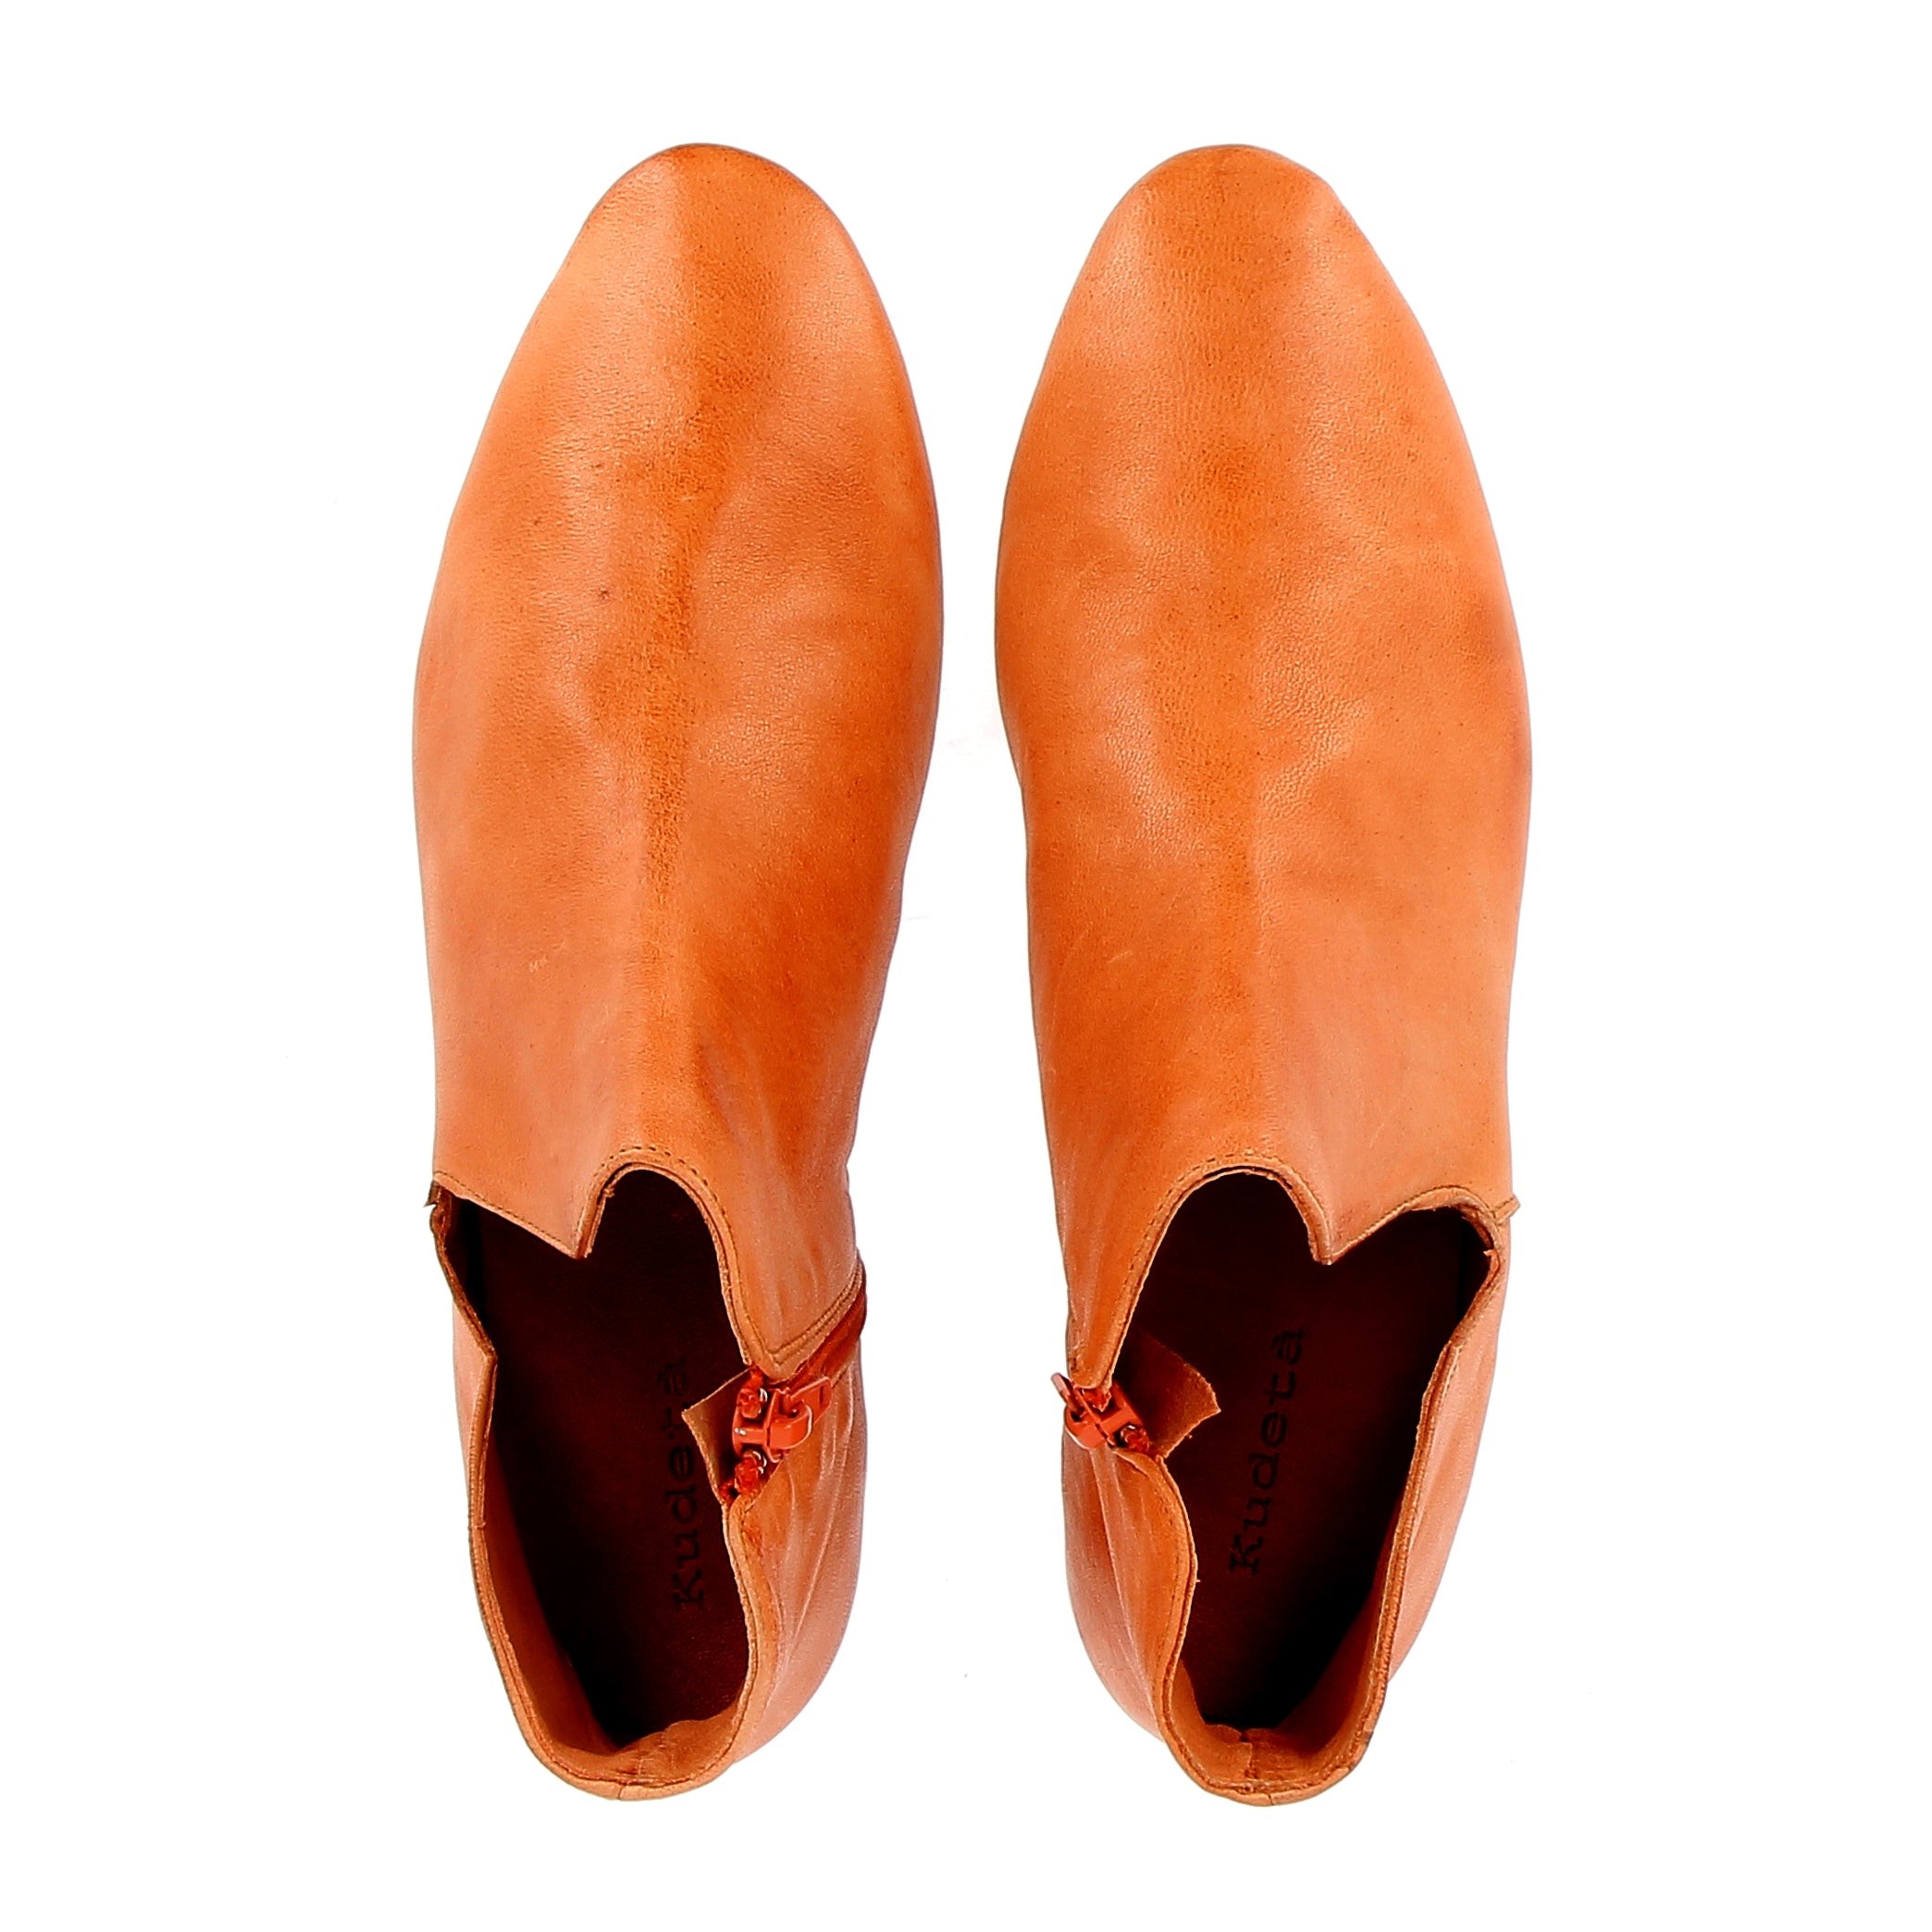 Orange leather open ankle boot